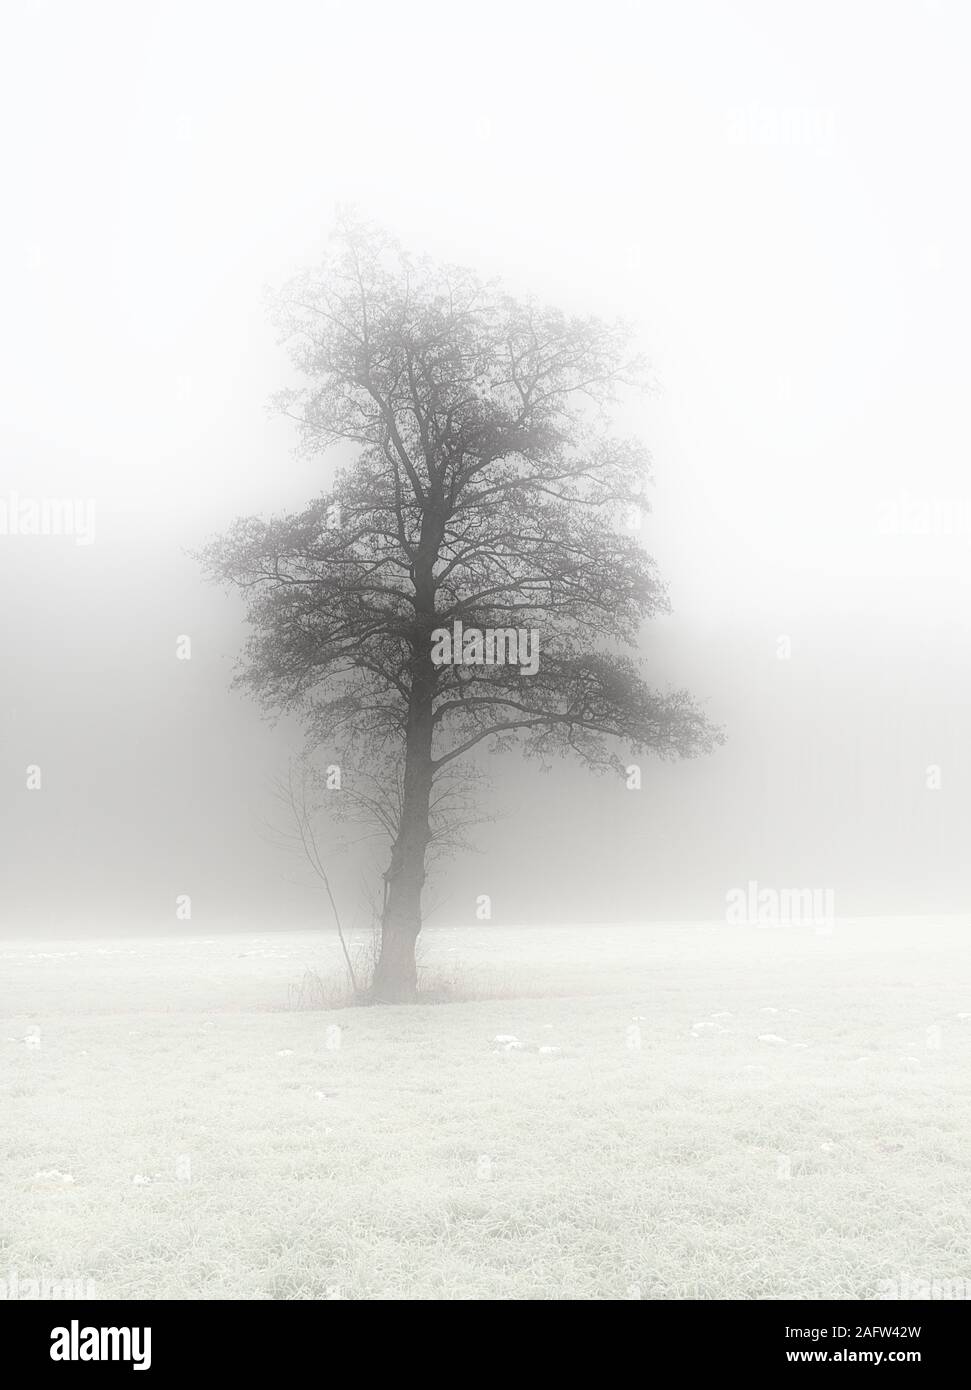 Tree in winter landscape with foggy background Stock Photo